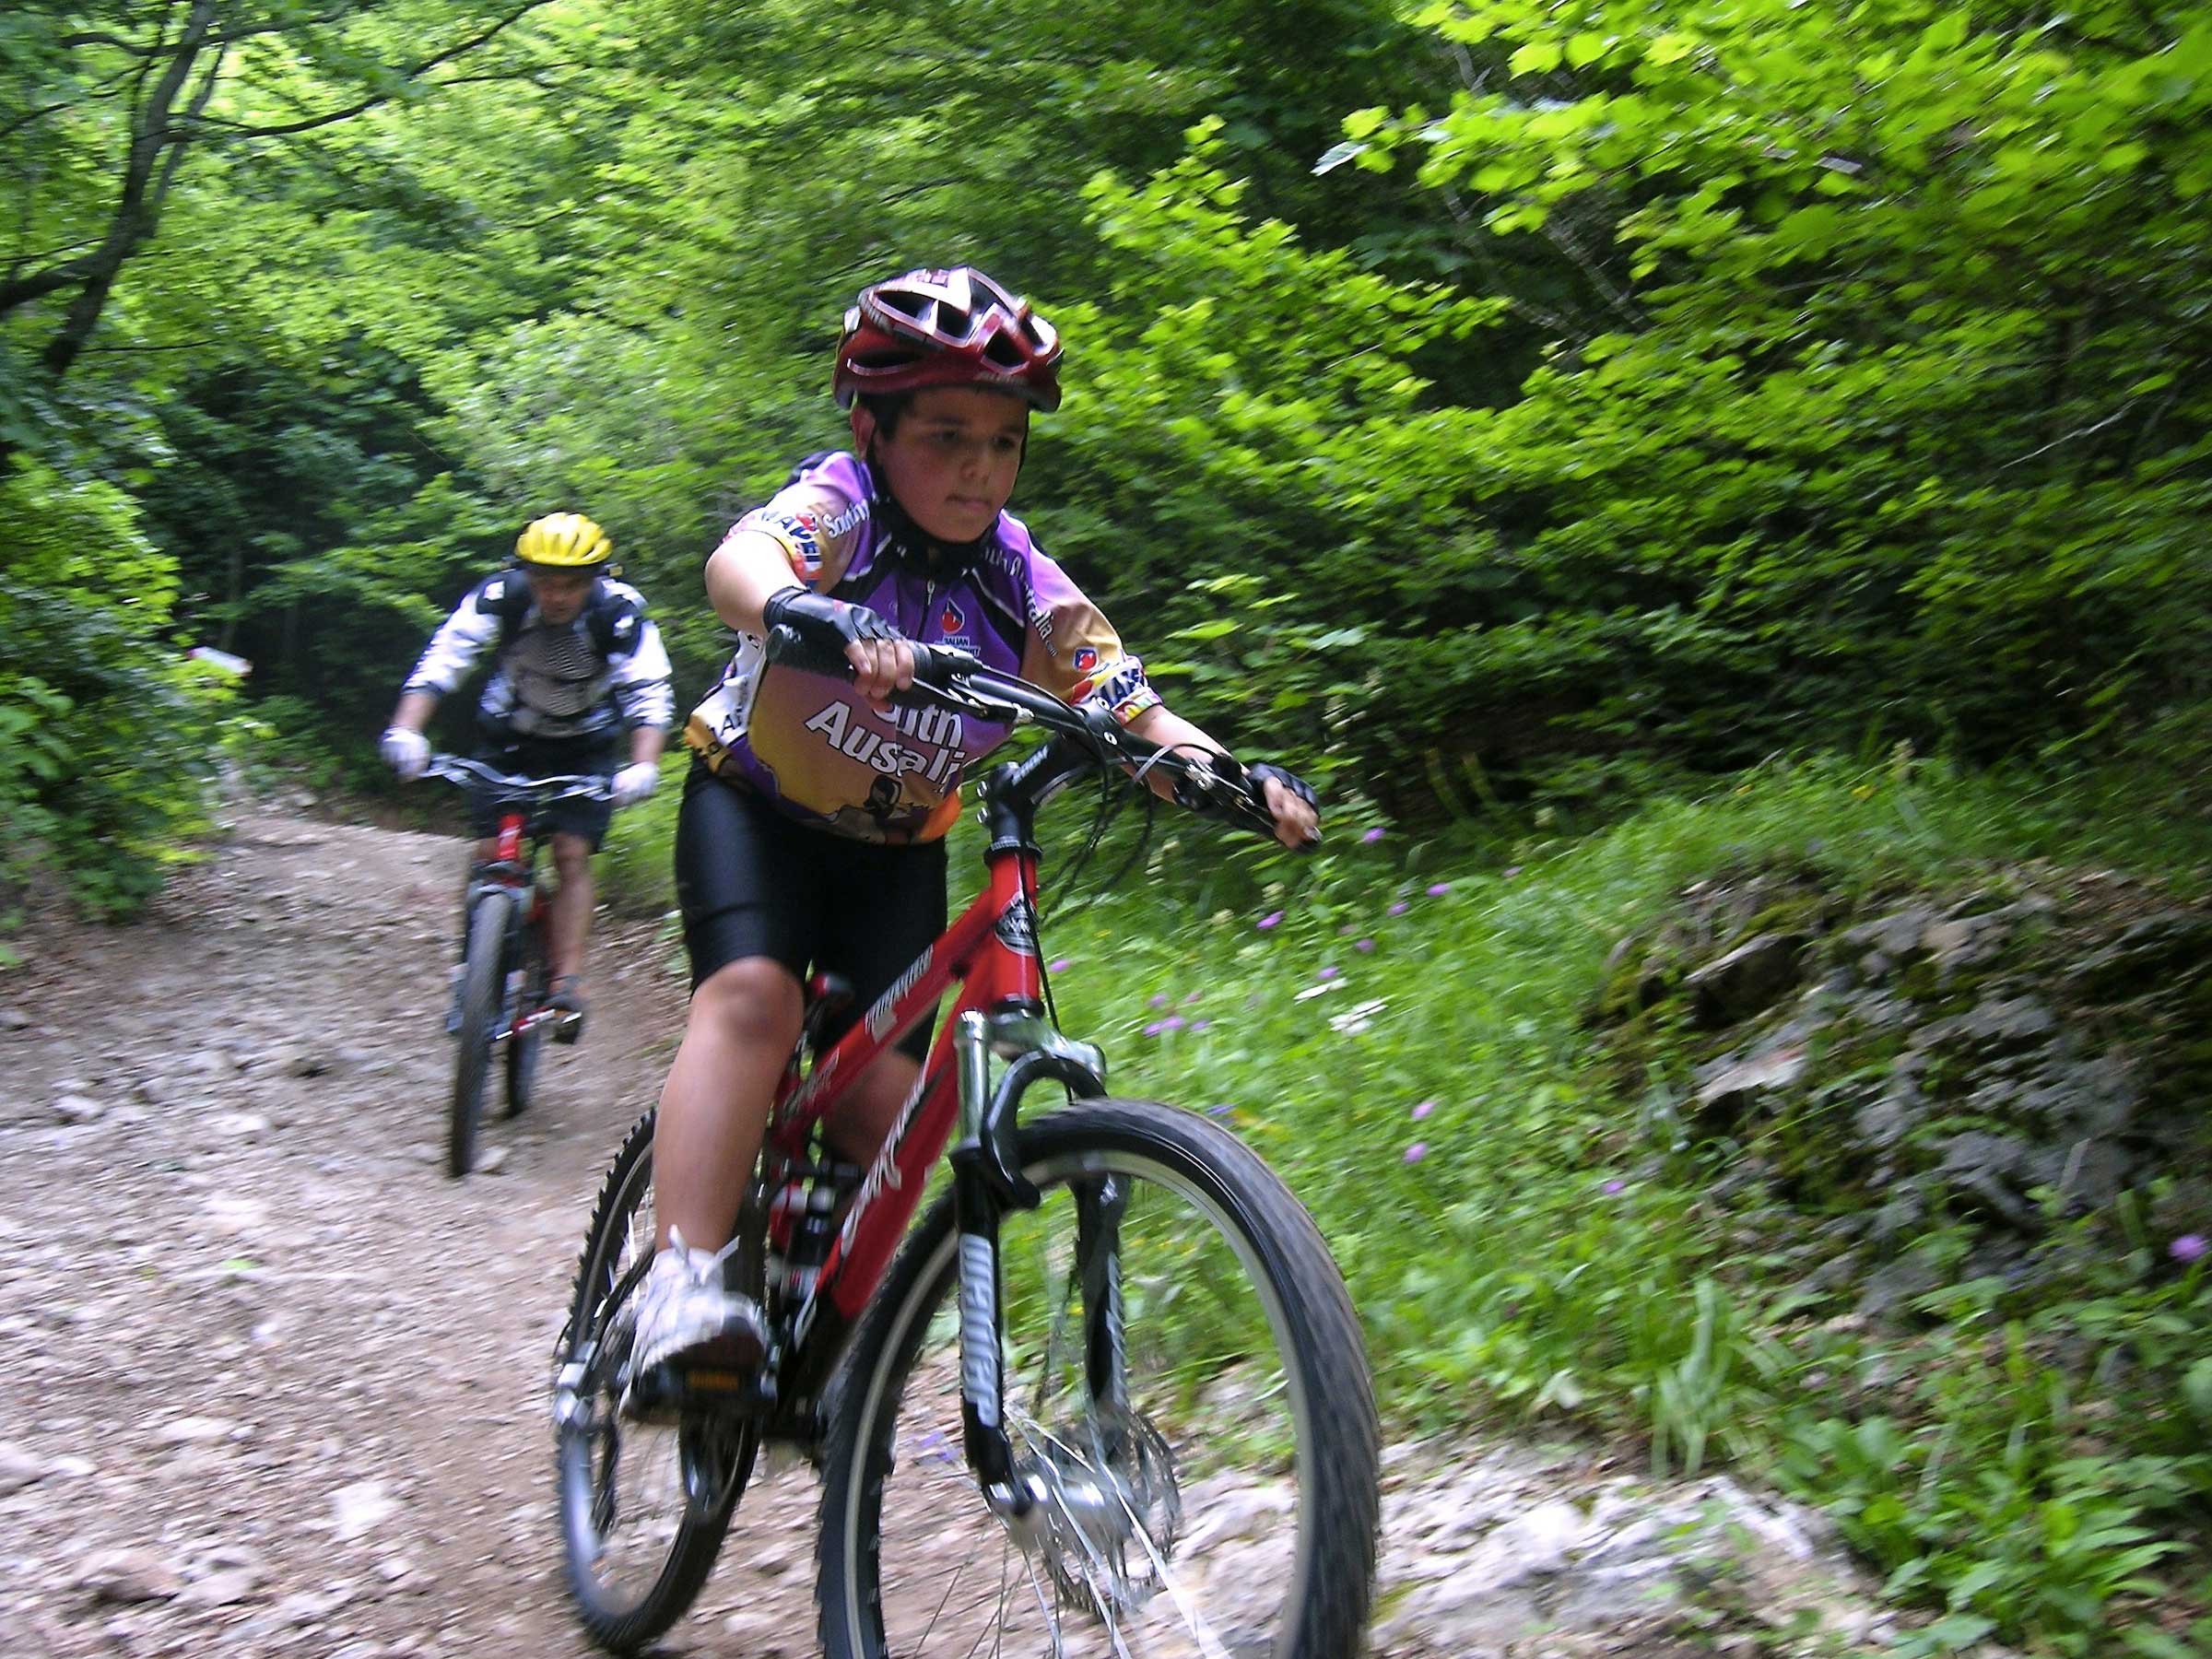 TOP 5 CYCLE TRAILS FOR THE BIKE FAMILY